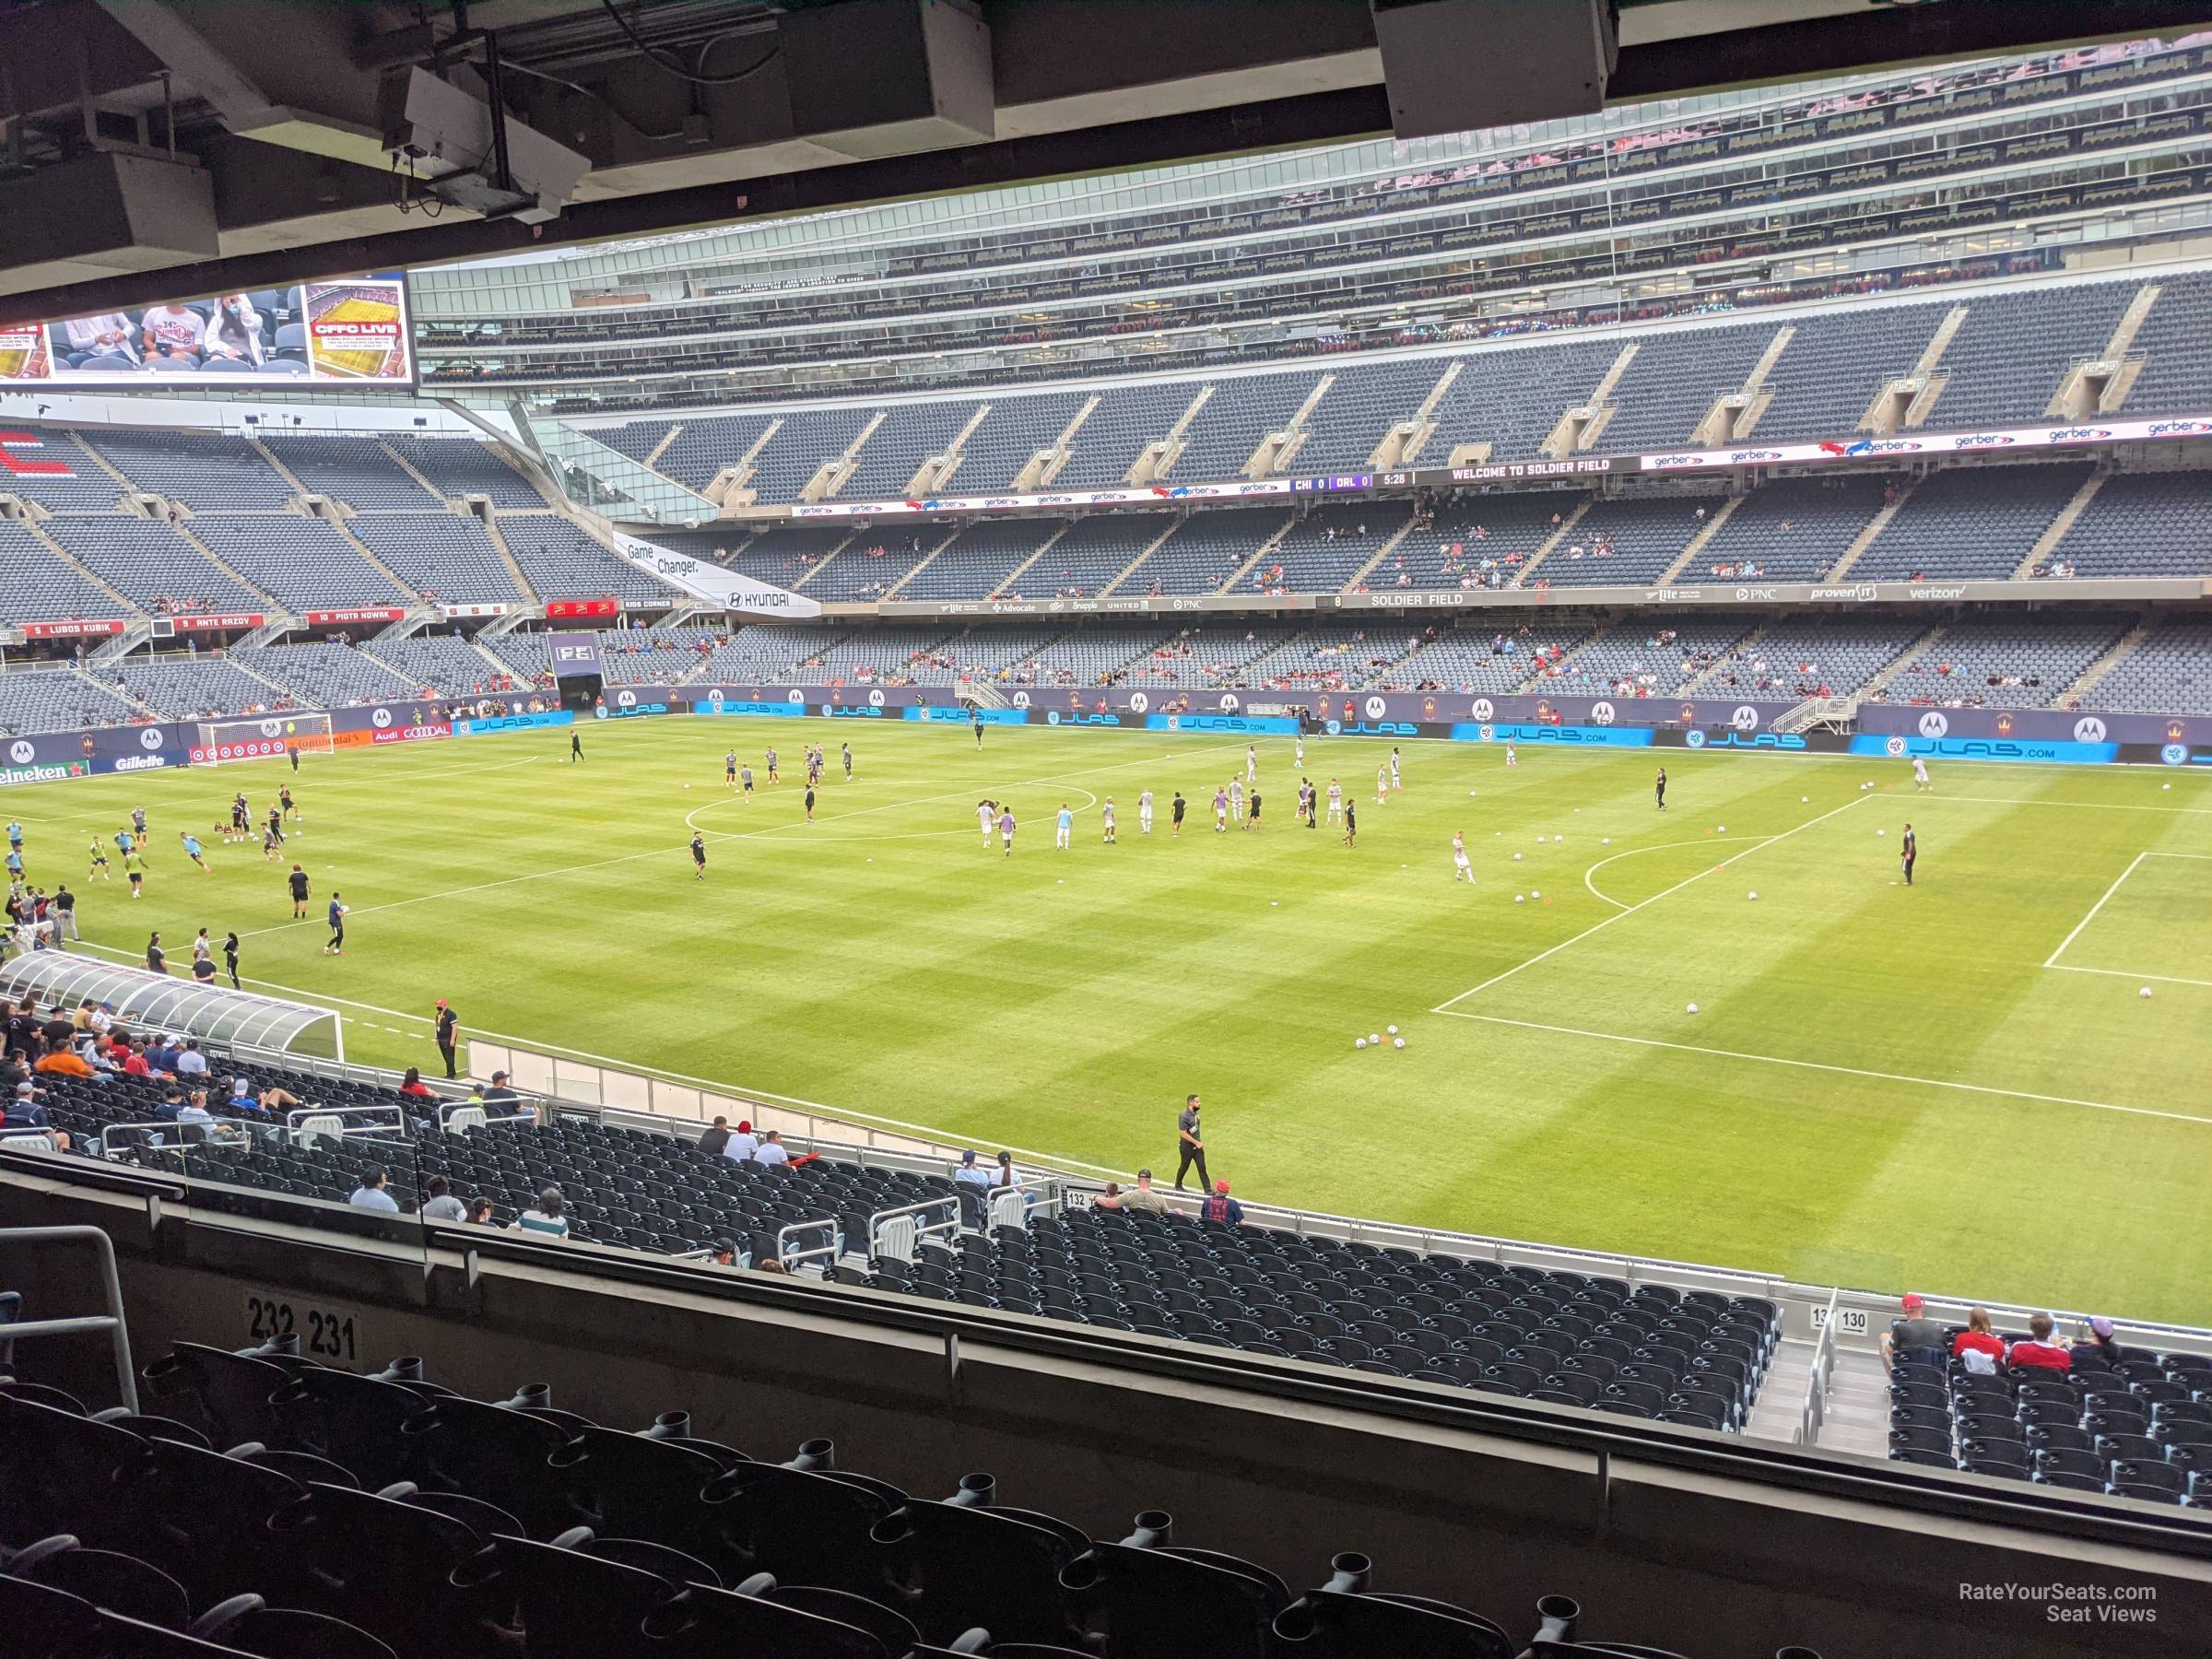 section 231, row 6 seat view  for soccer - soldier field